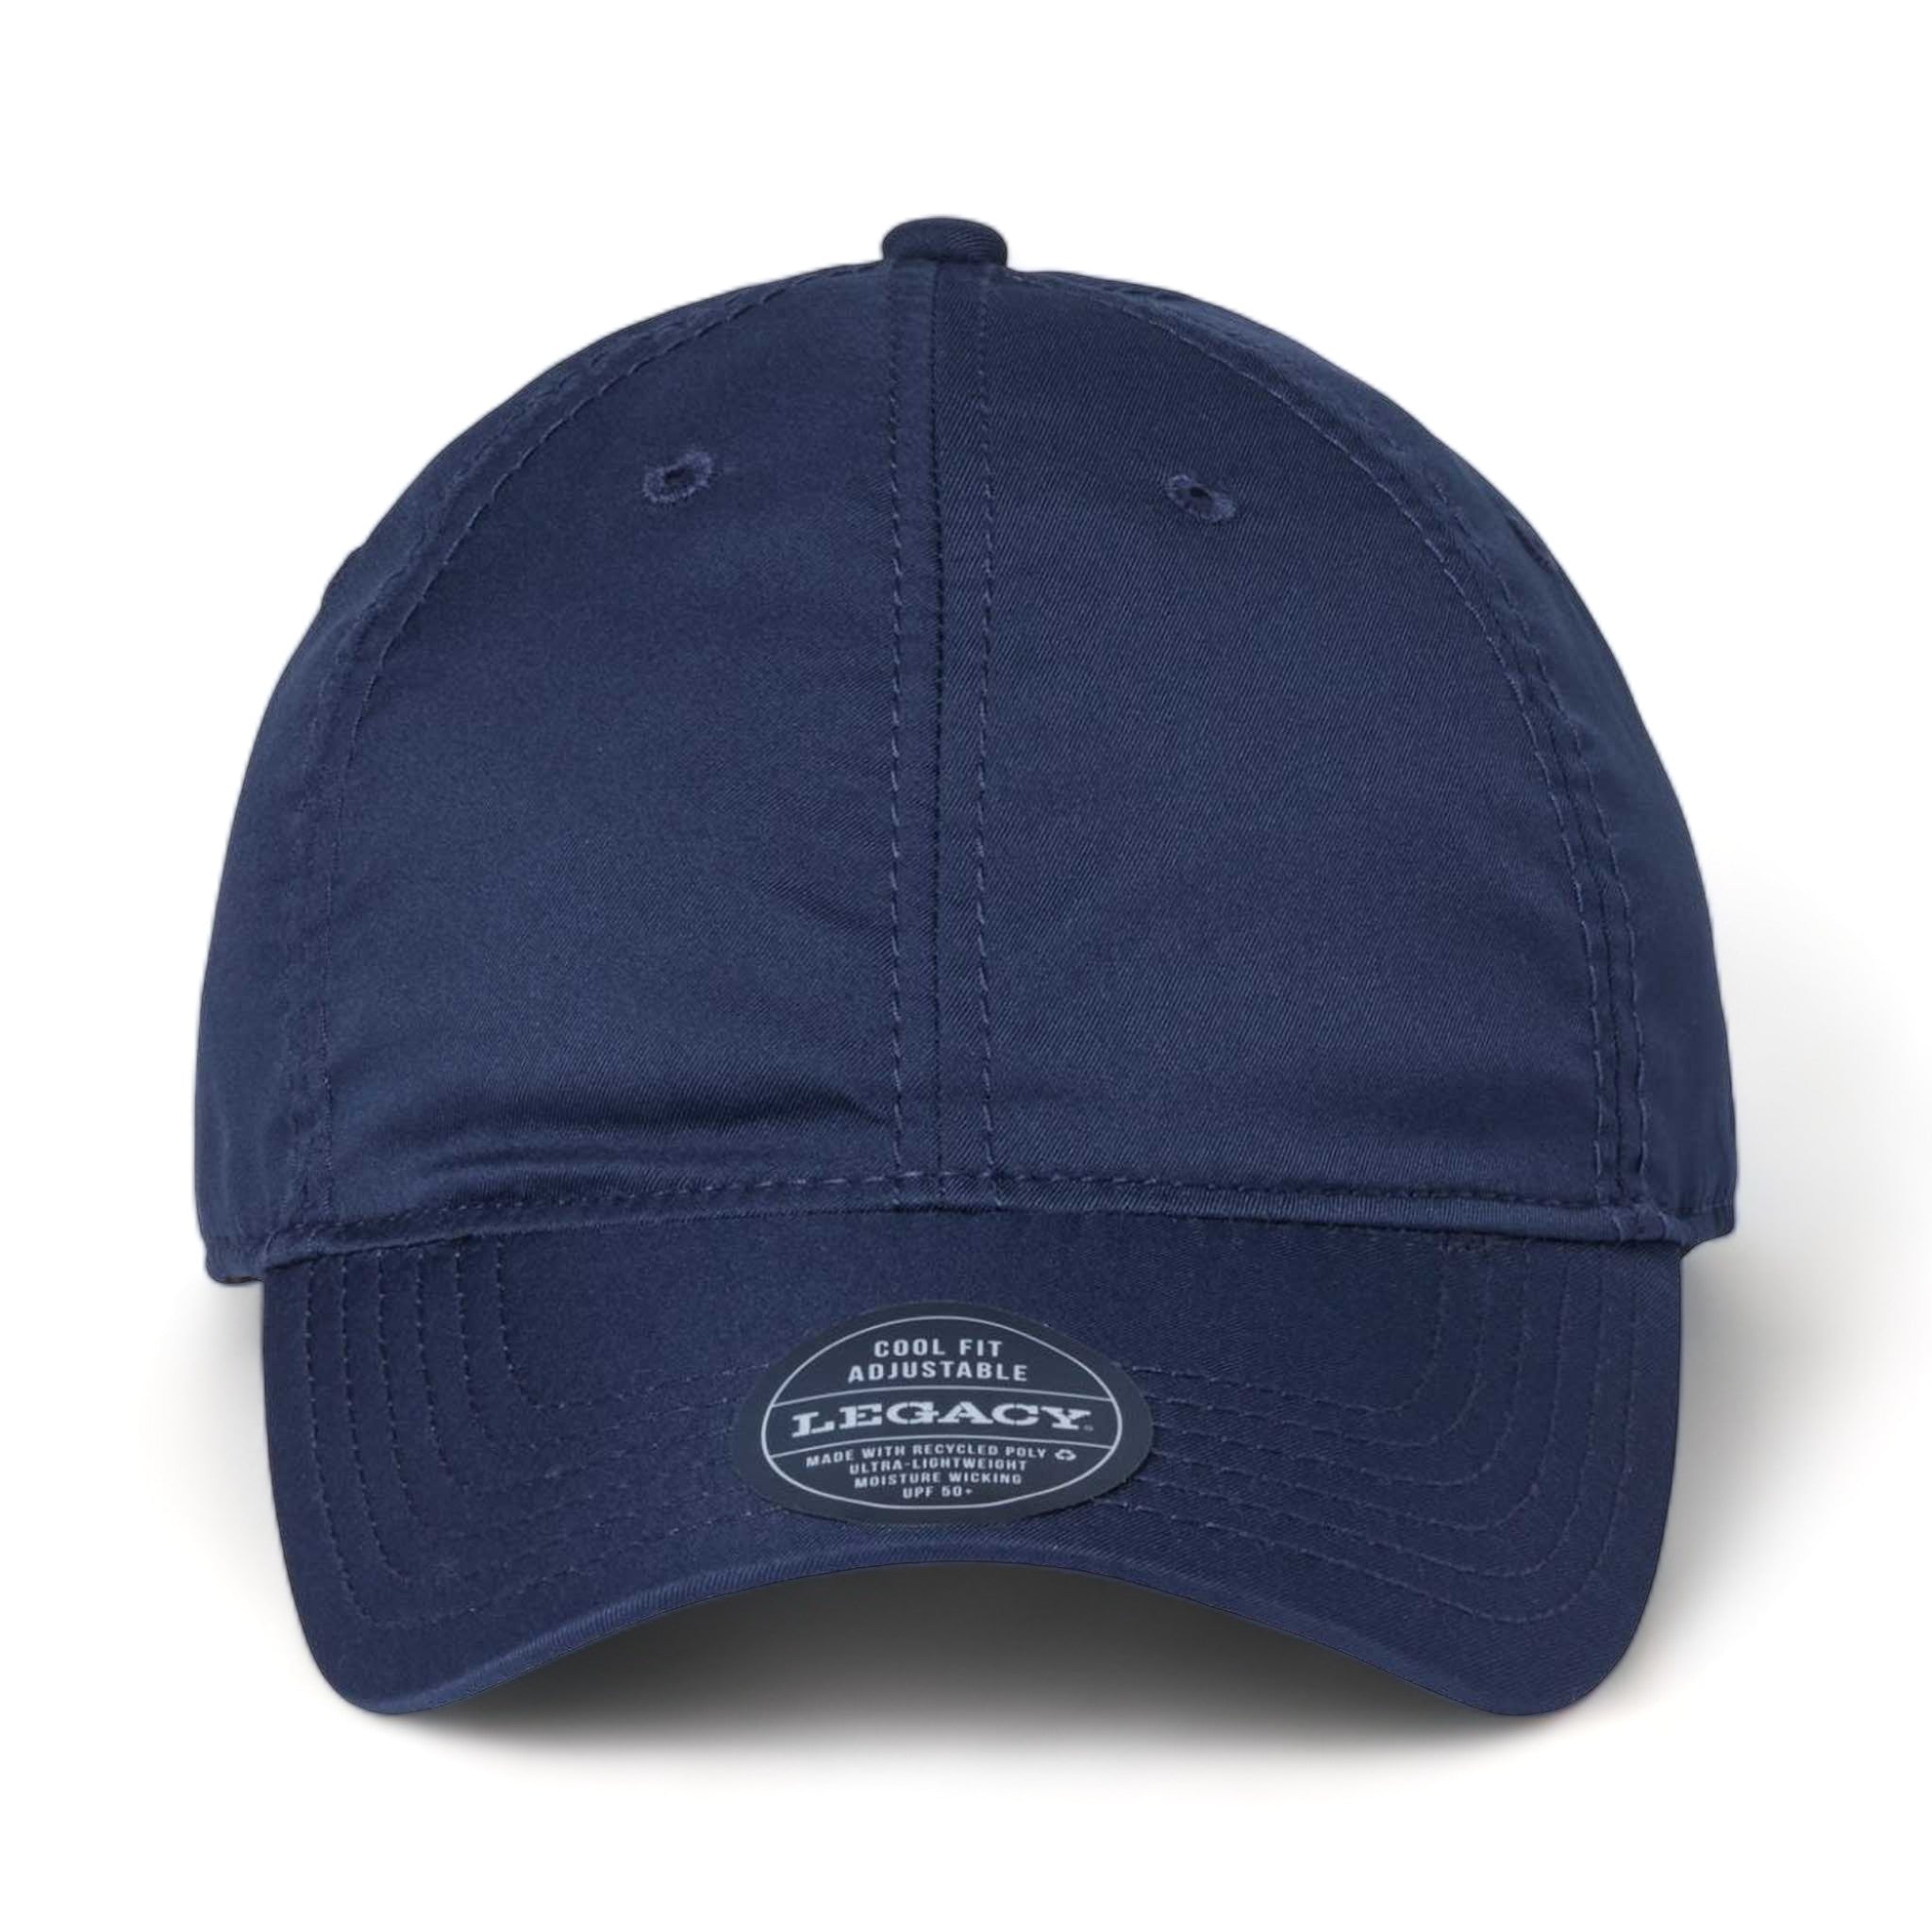 Front view of LEGACY CFA custom hat in navy